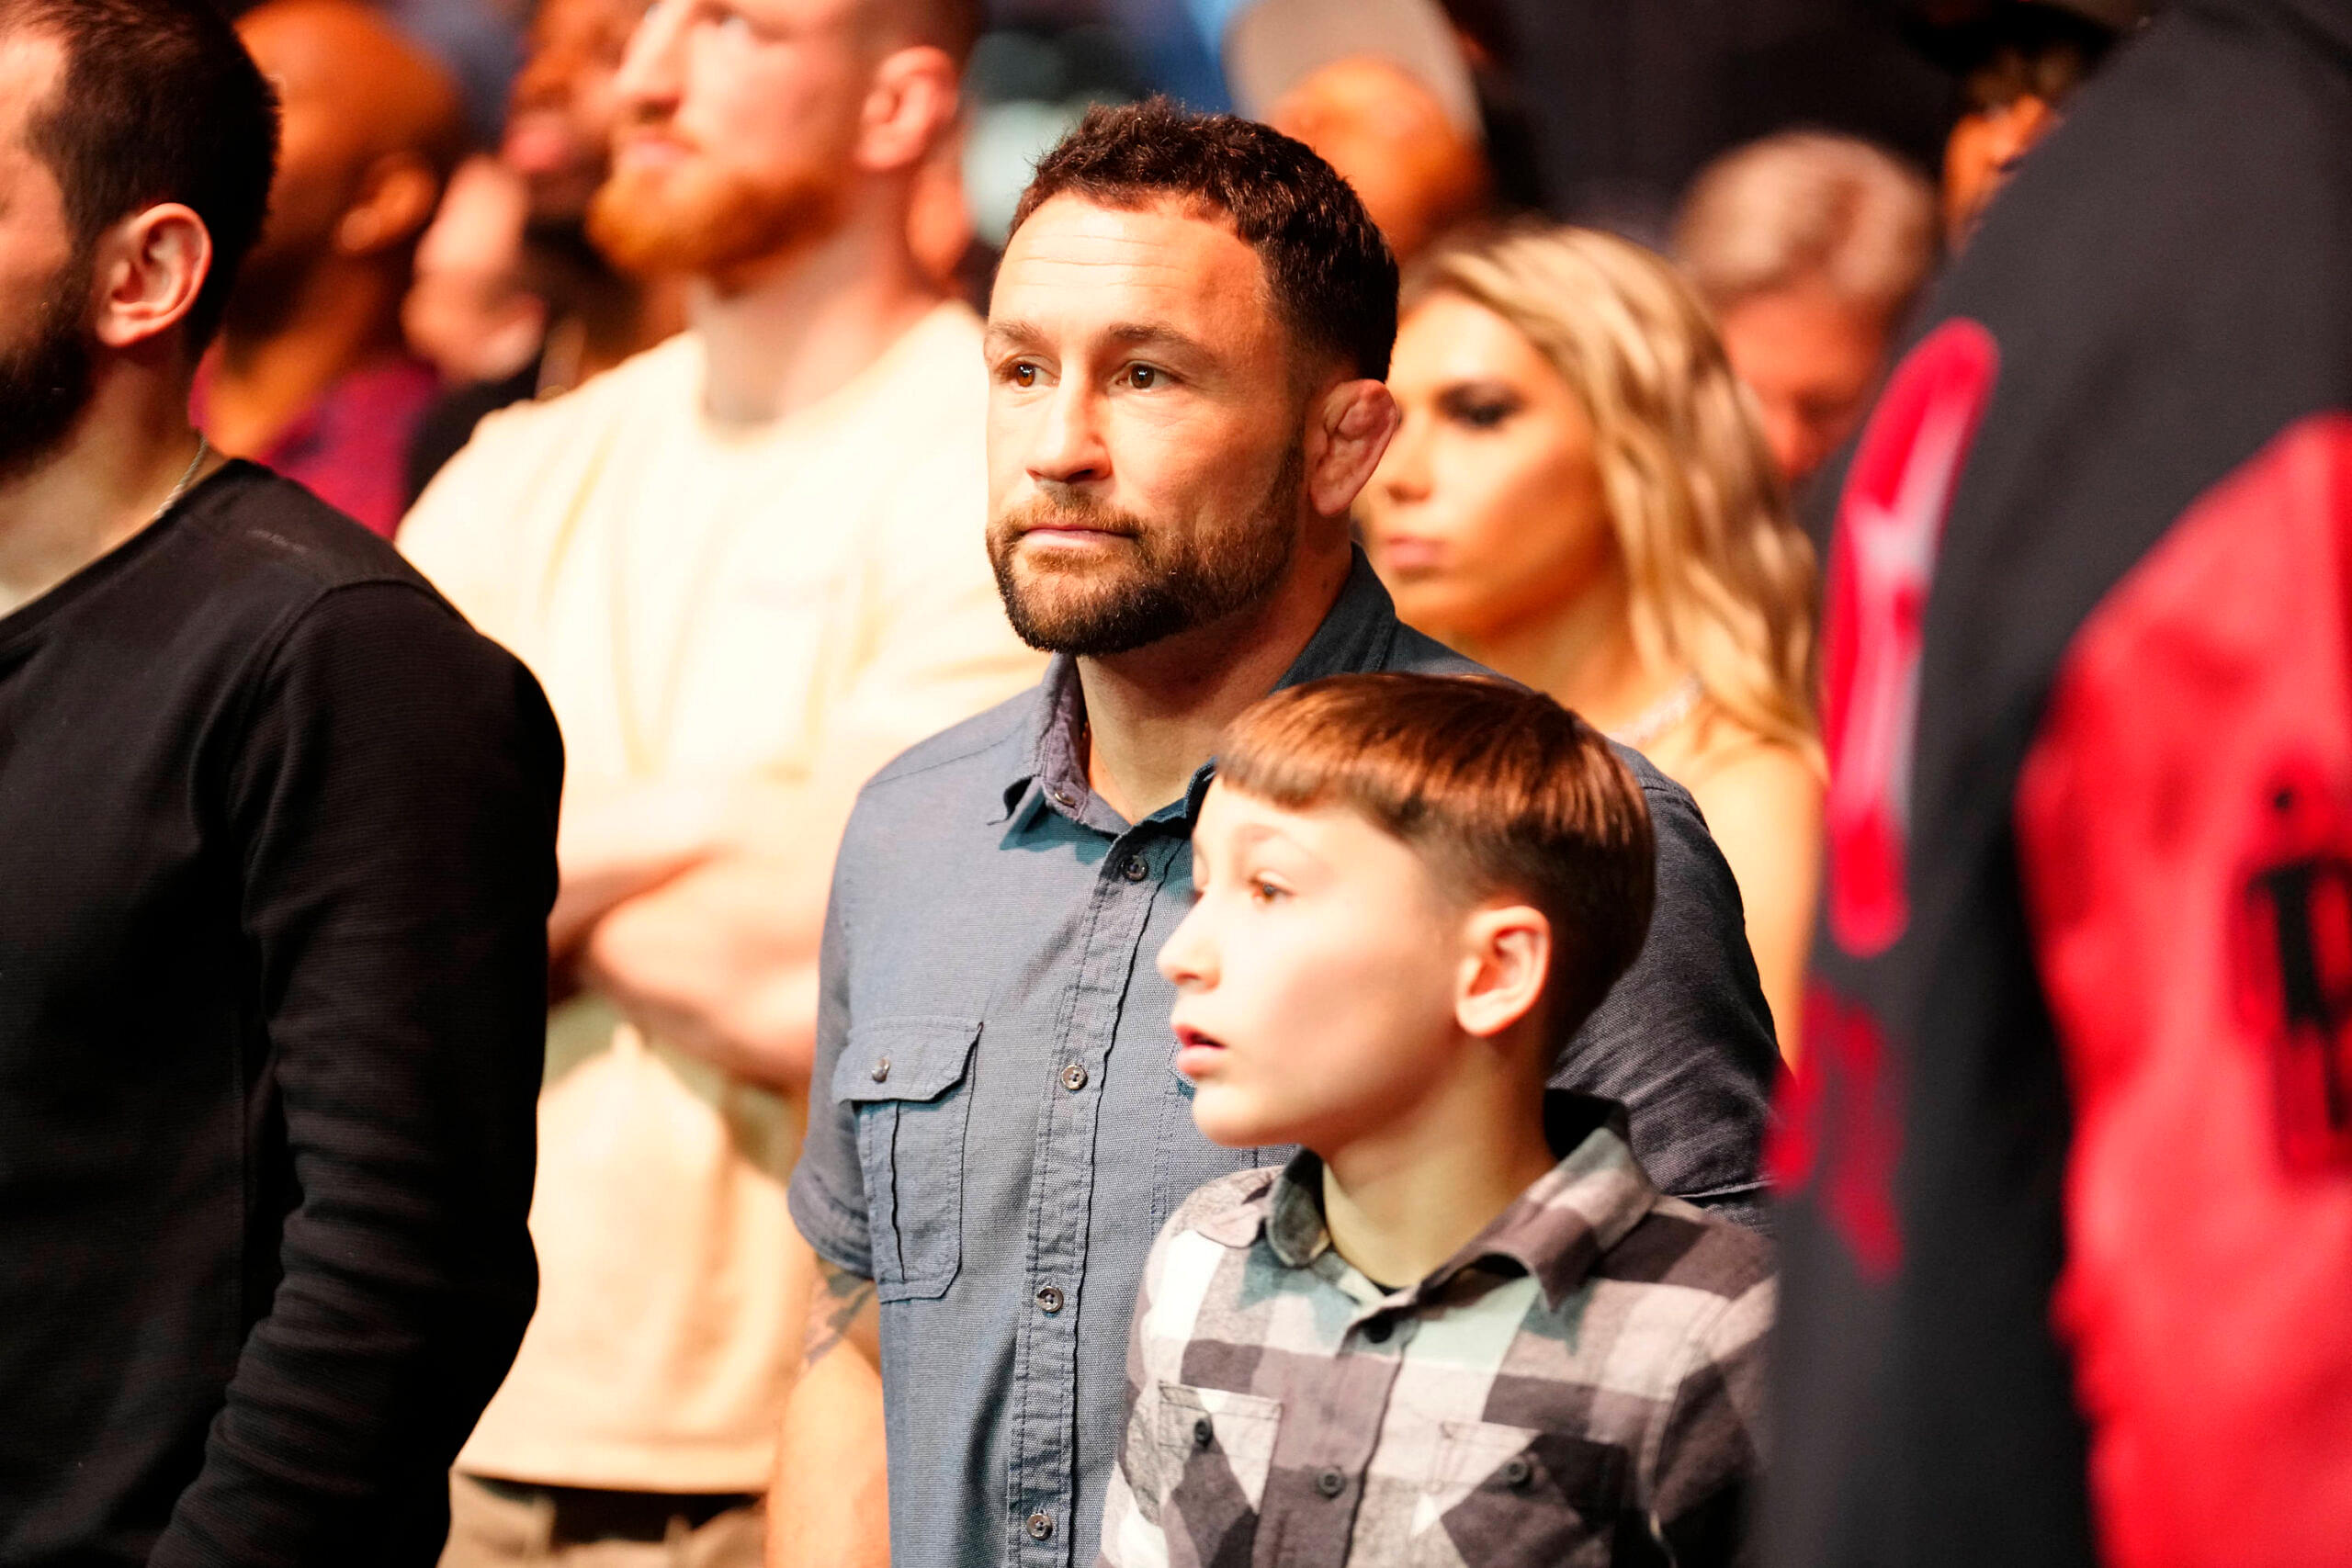 Frankie Edgar UFC Record: How Many Losses Does ‘The Answer’ Have in the UFC?